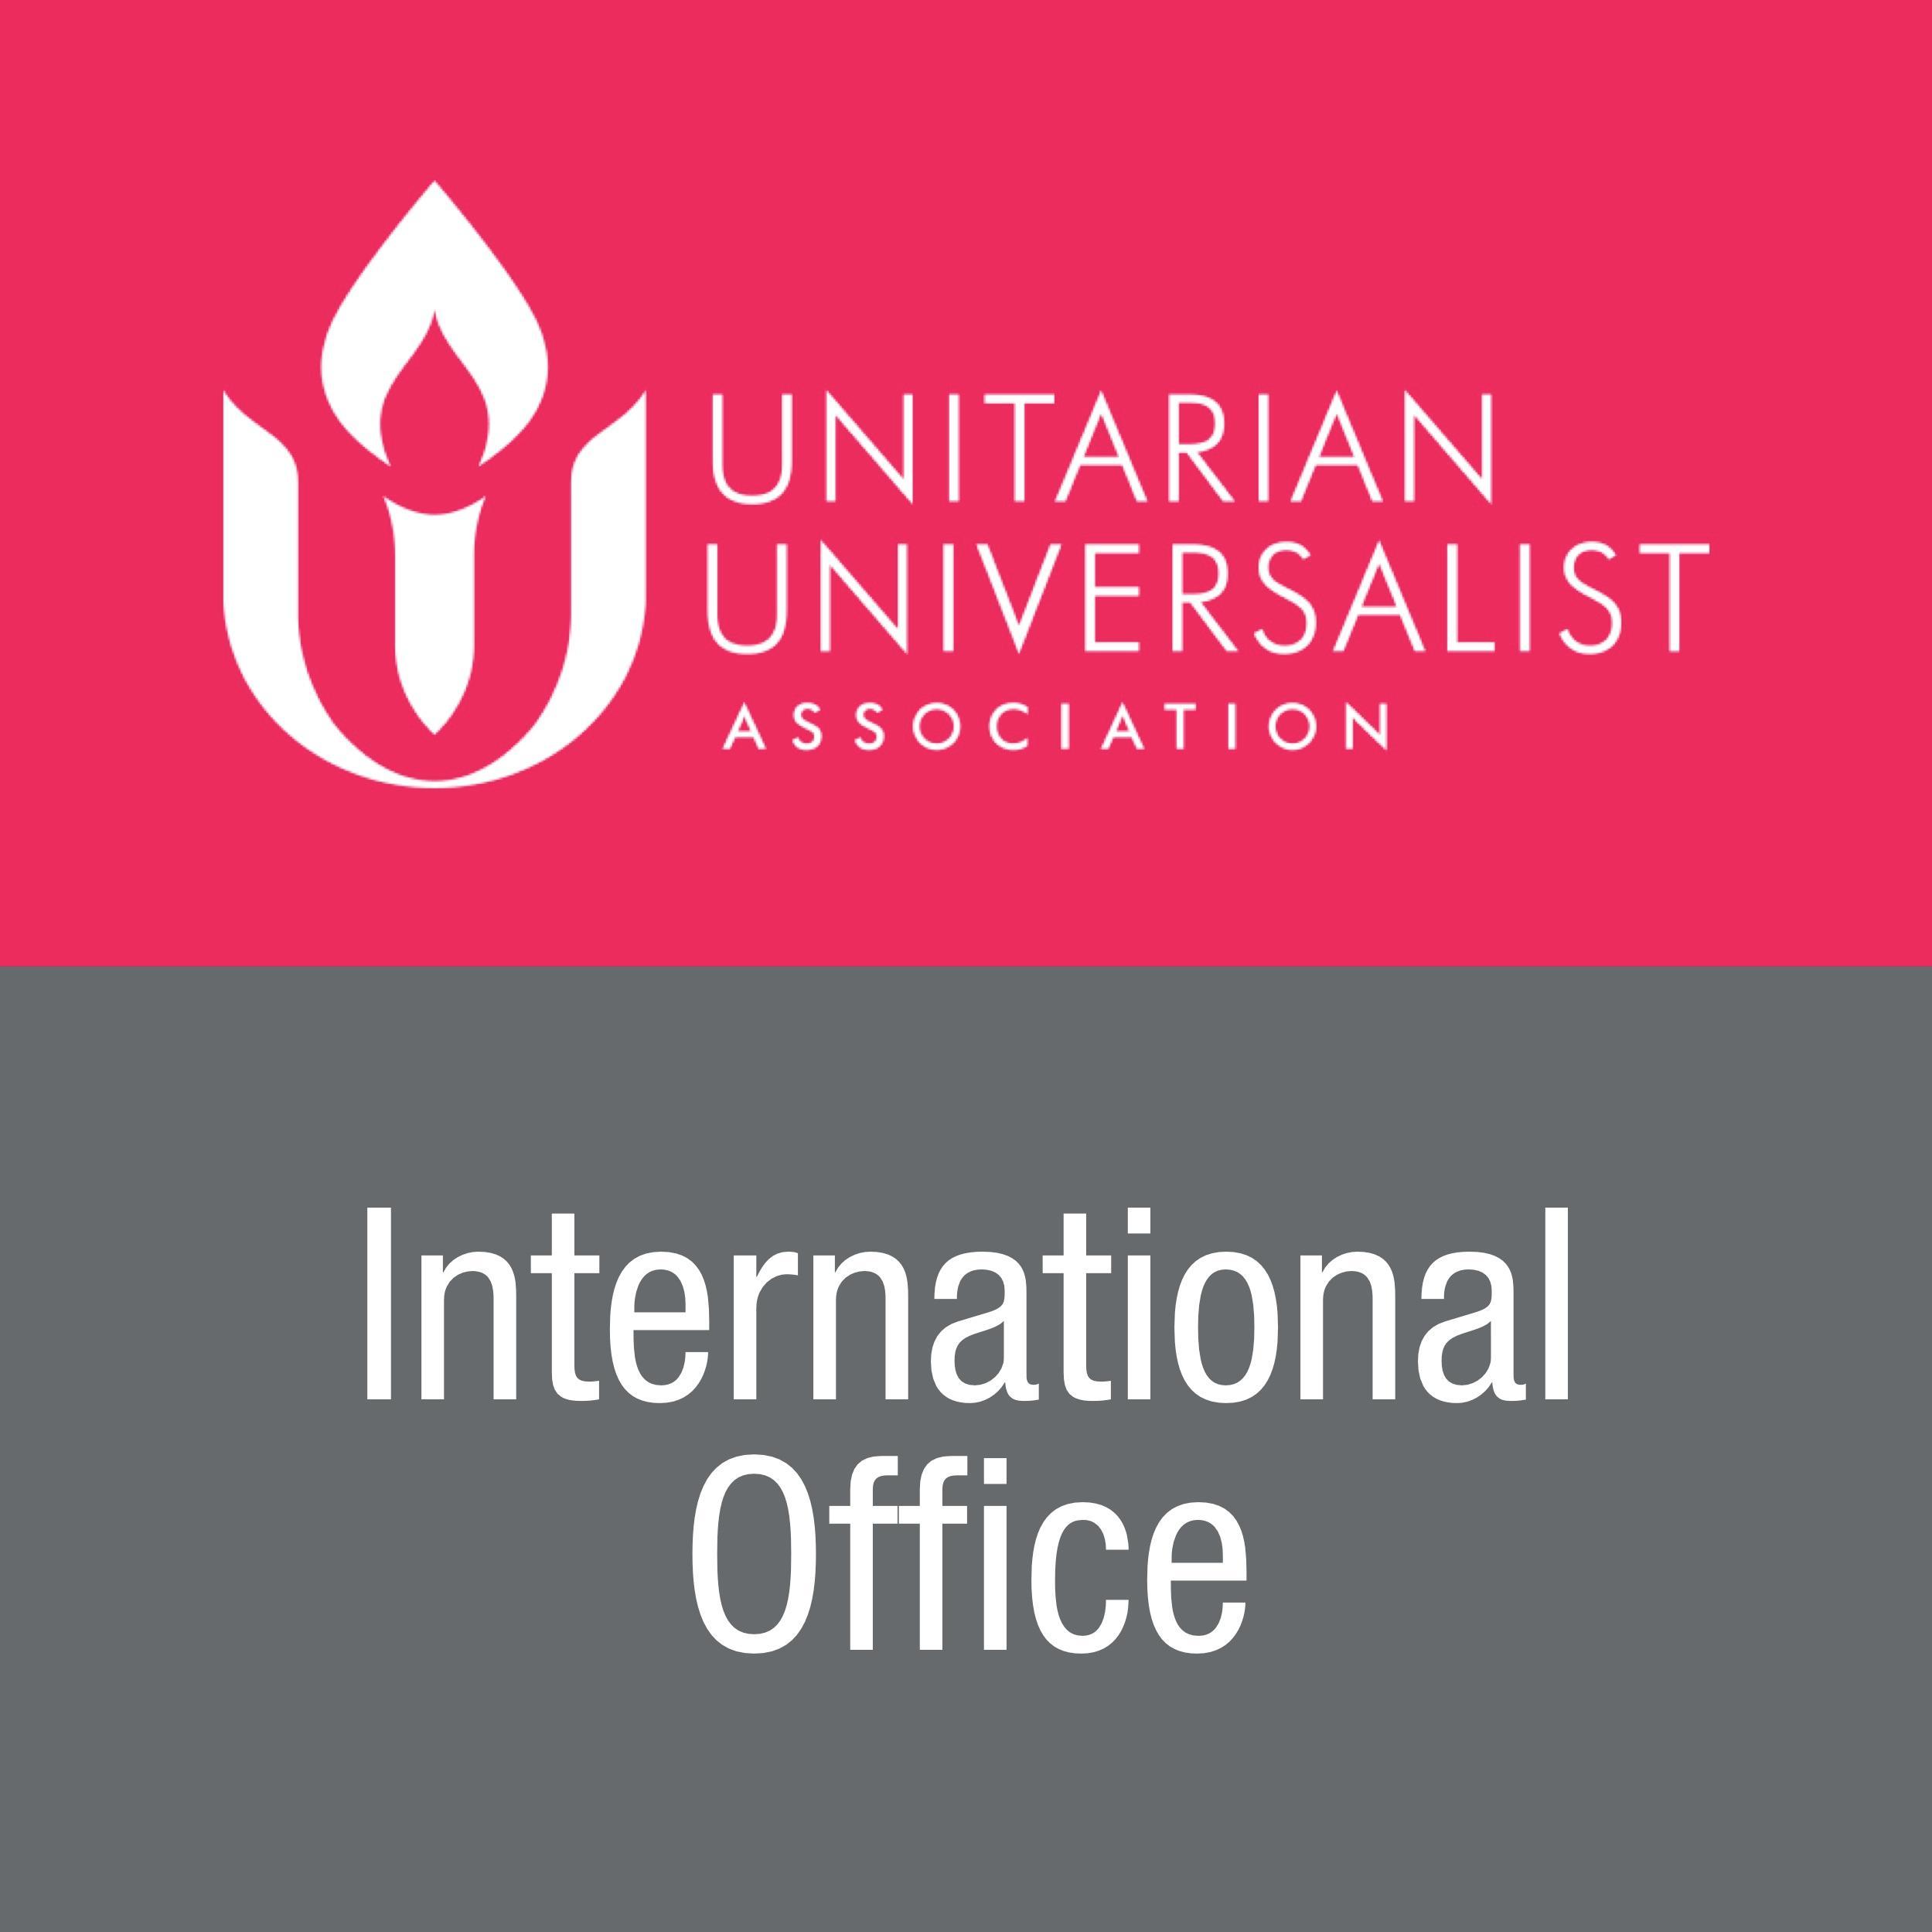 Engage with global Unitarian/Universalist faith in action